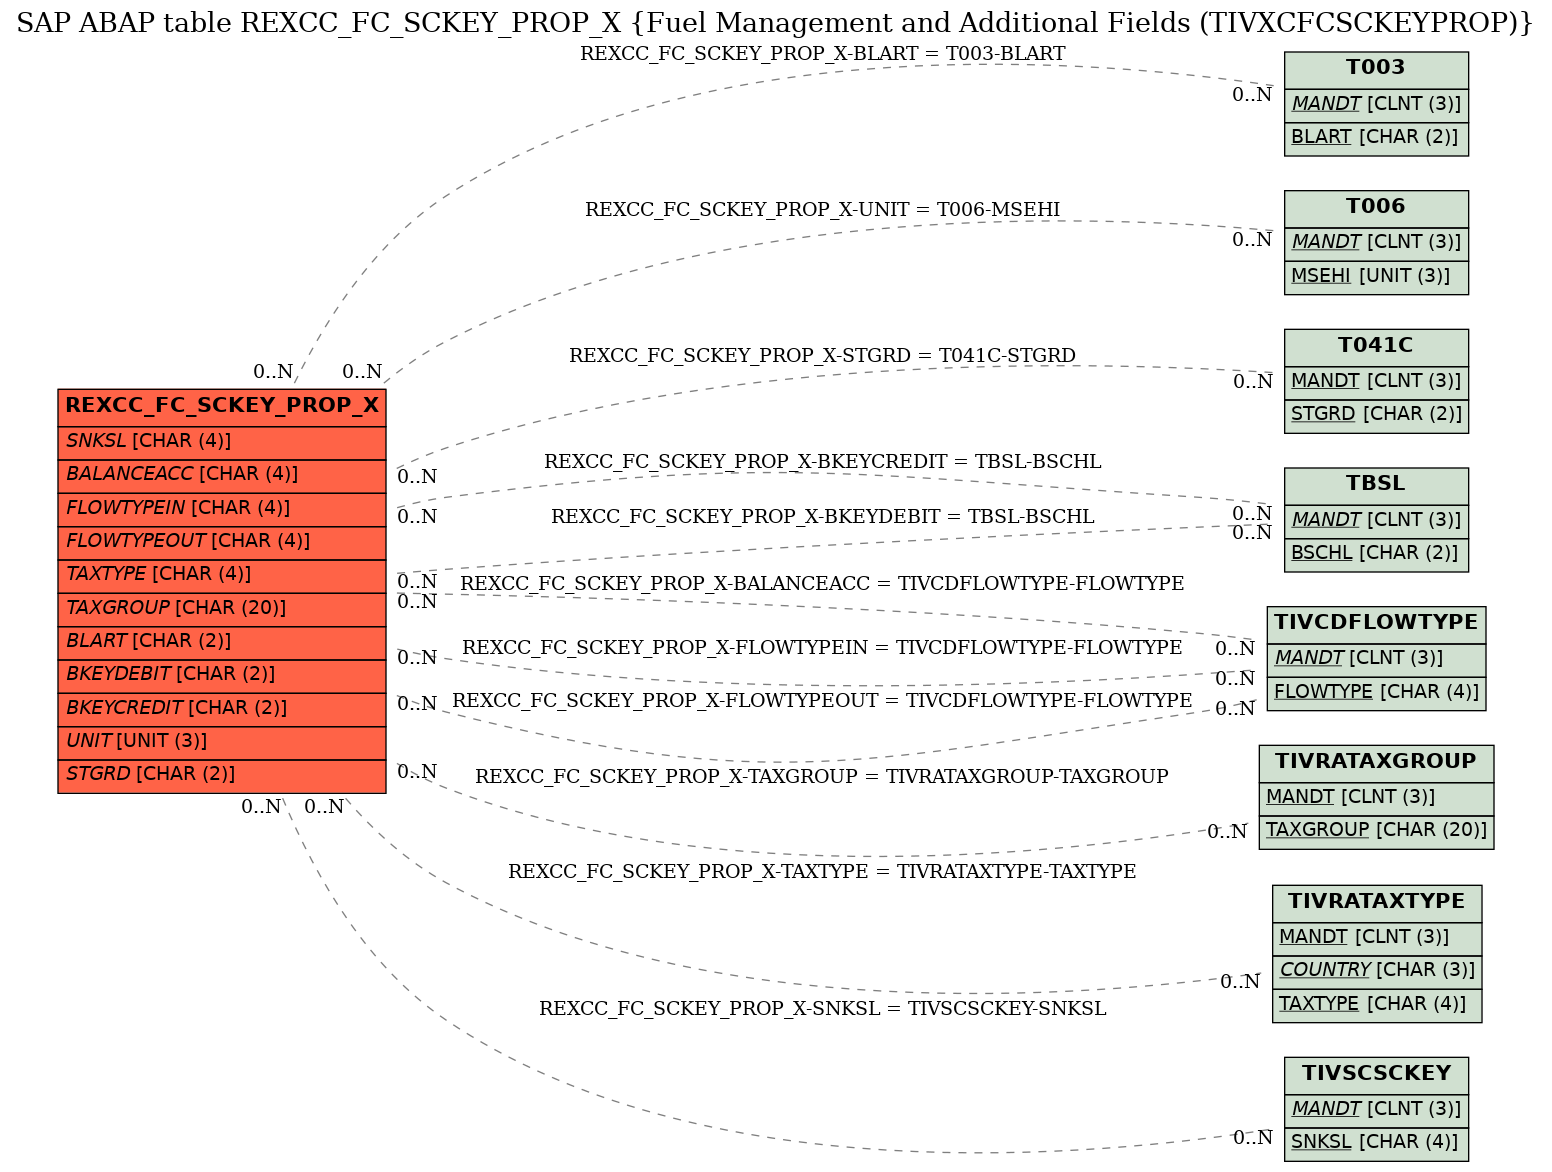 E-R Diagram for table REXCC_FC_SCKEY_PROP_X (Fuel Management and Additional Fields (TIVXCFCSCKEYPROP))